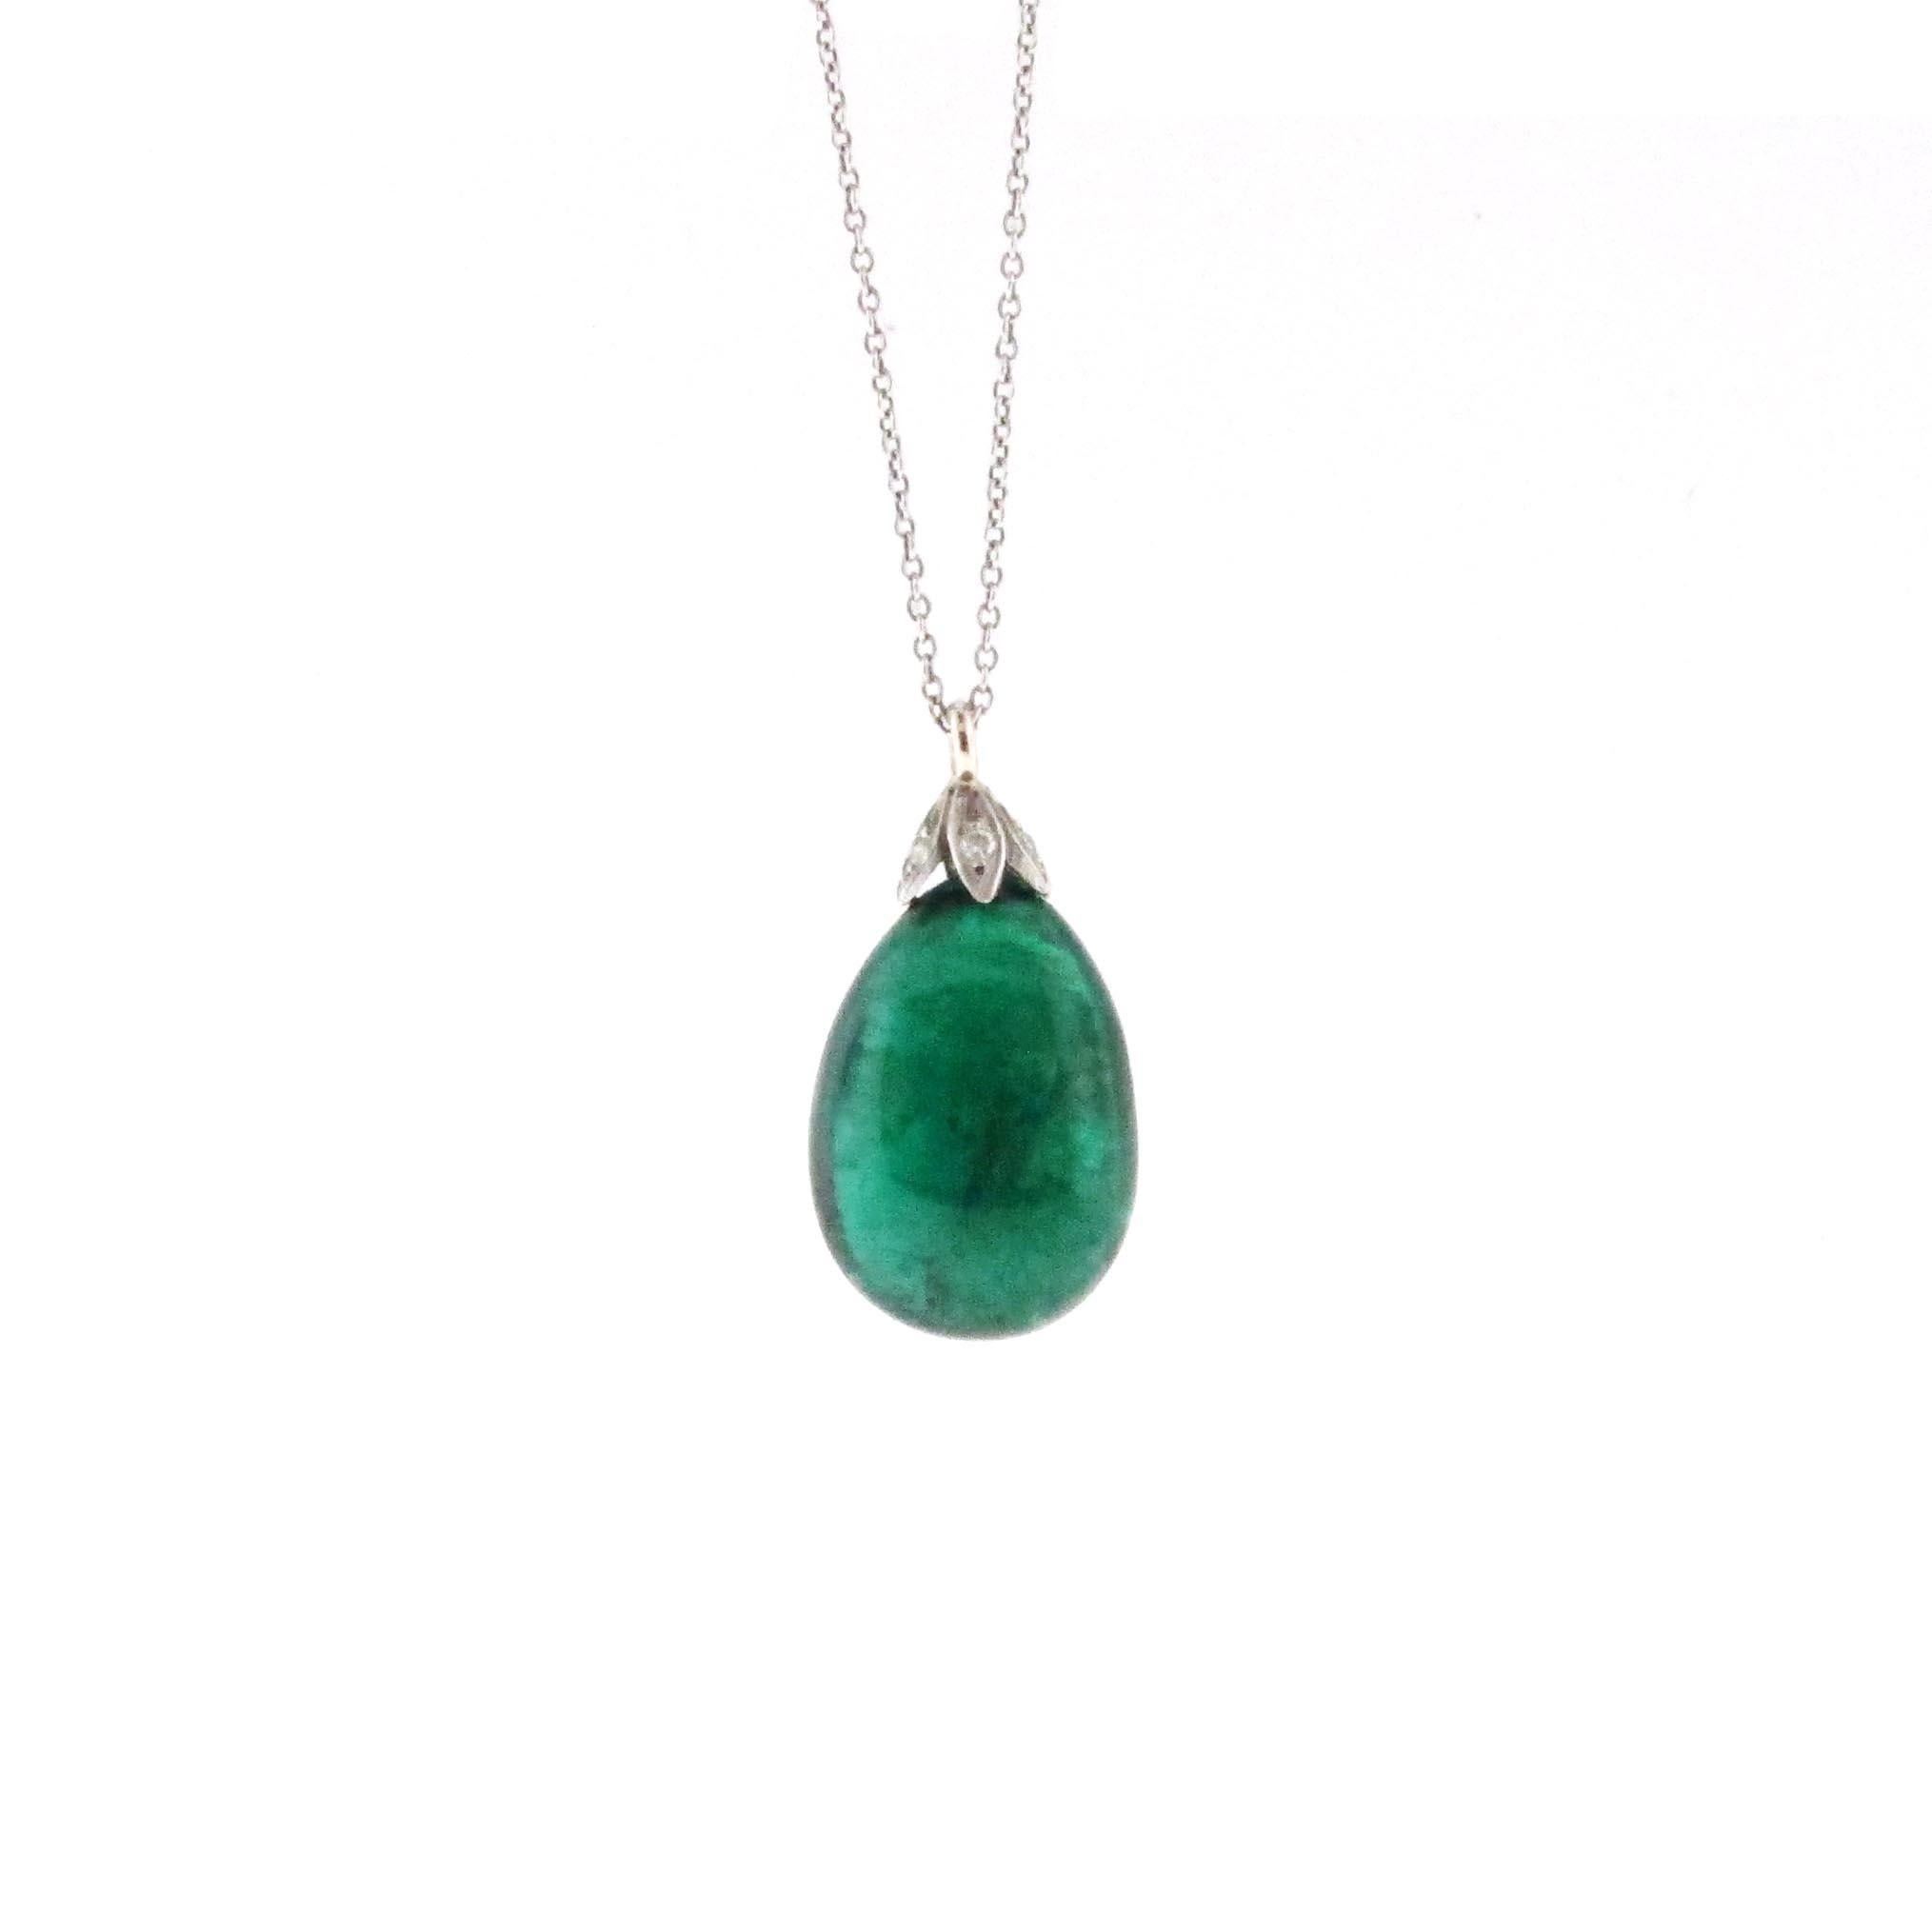 Modern 20.02 Carat Natural Emerald Pear Shape Drop Necklace with Diamond Topper